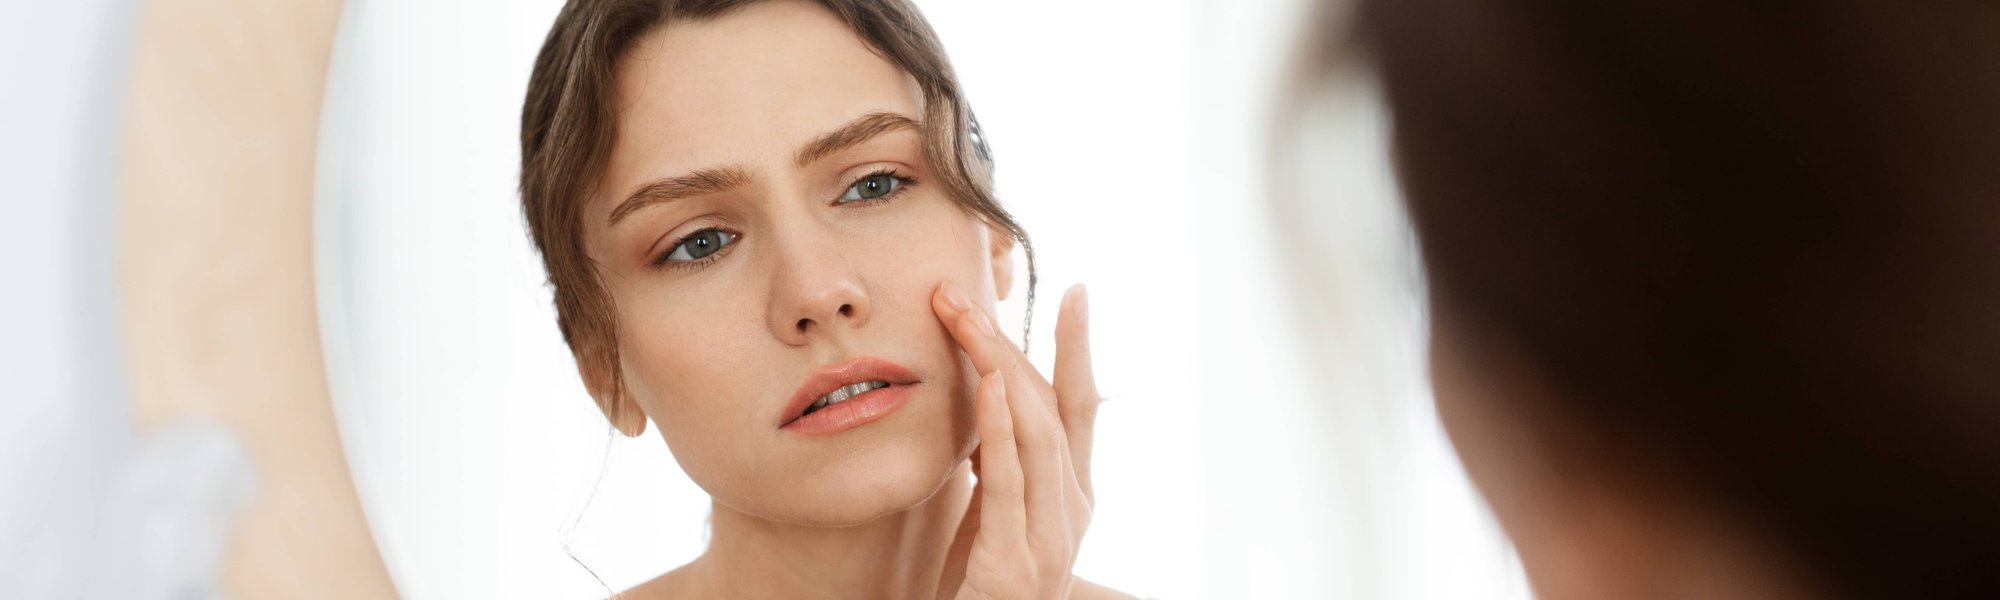 skincare mistakes, mistakes that make you look older, how to avoid aging skin, youthful skin